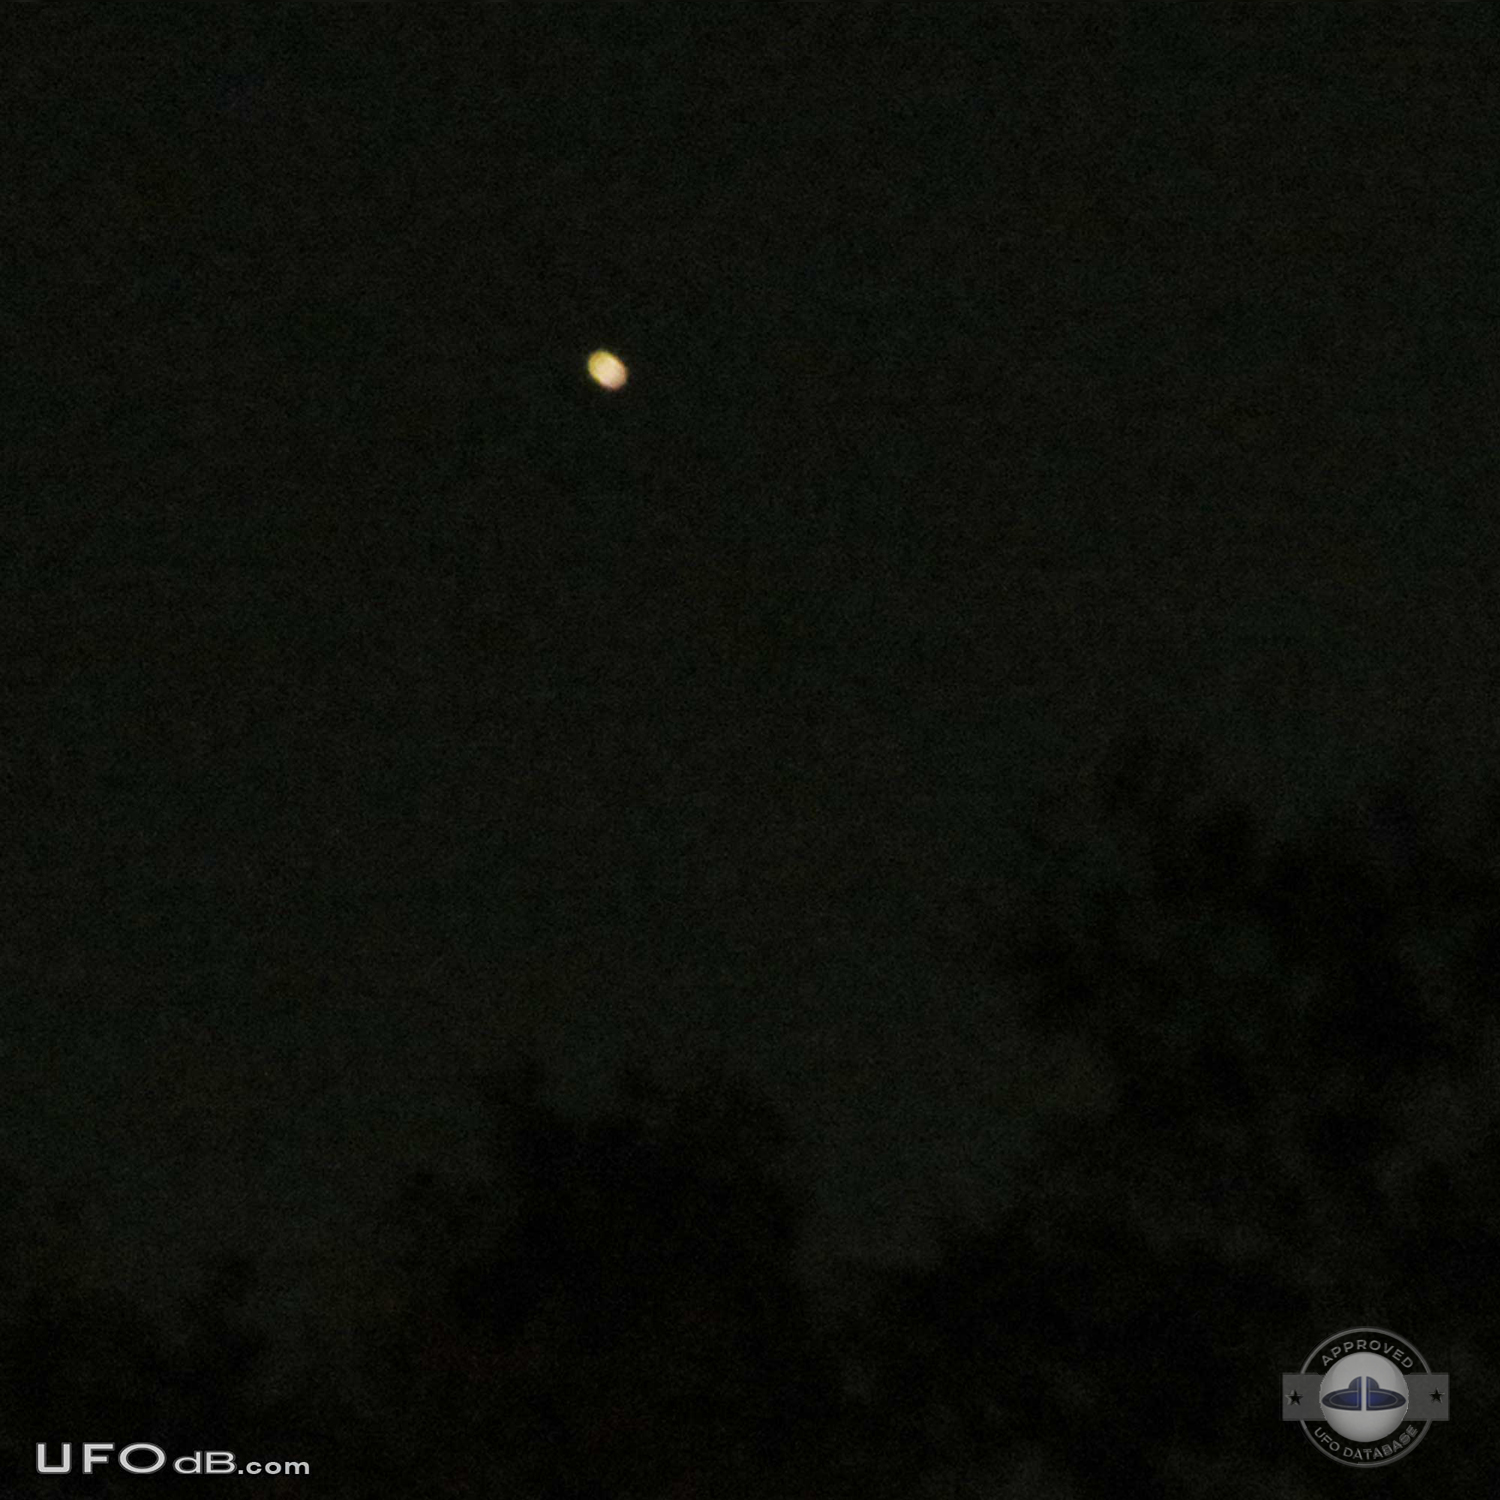 UFO sightings seen by neighbors and Local Police in Texas USA 2012 UFO Picture #479-4